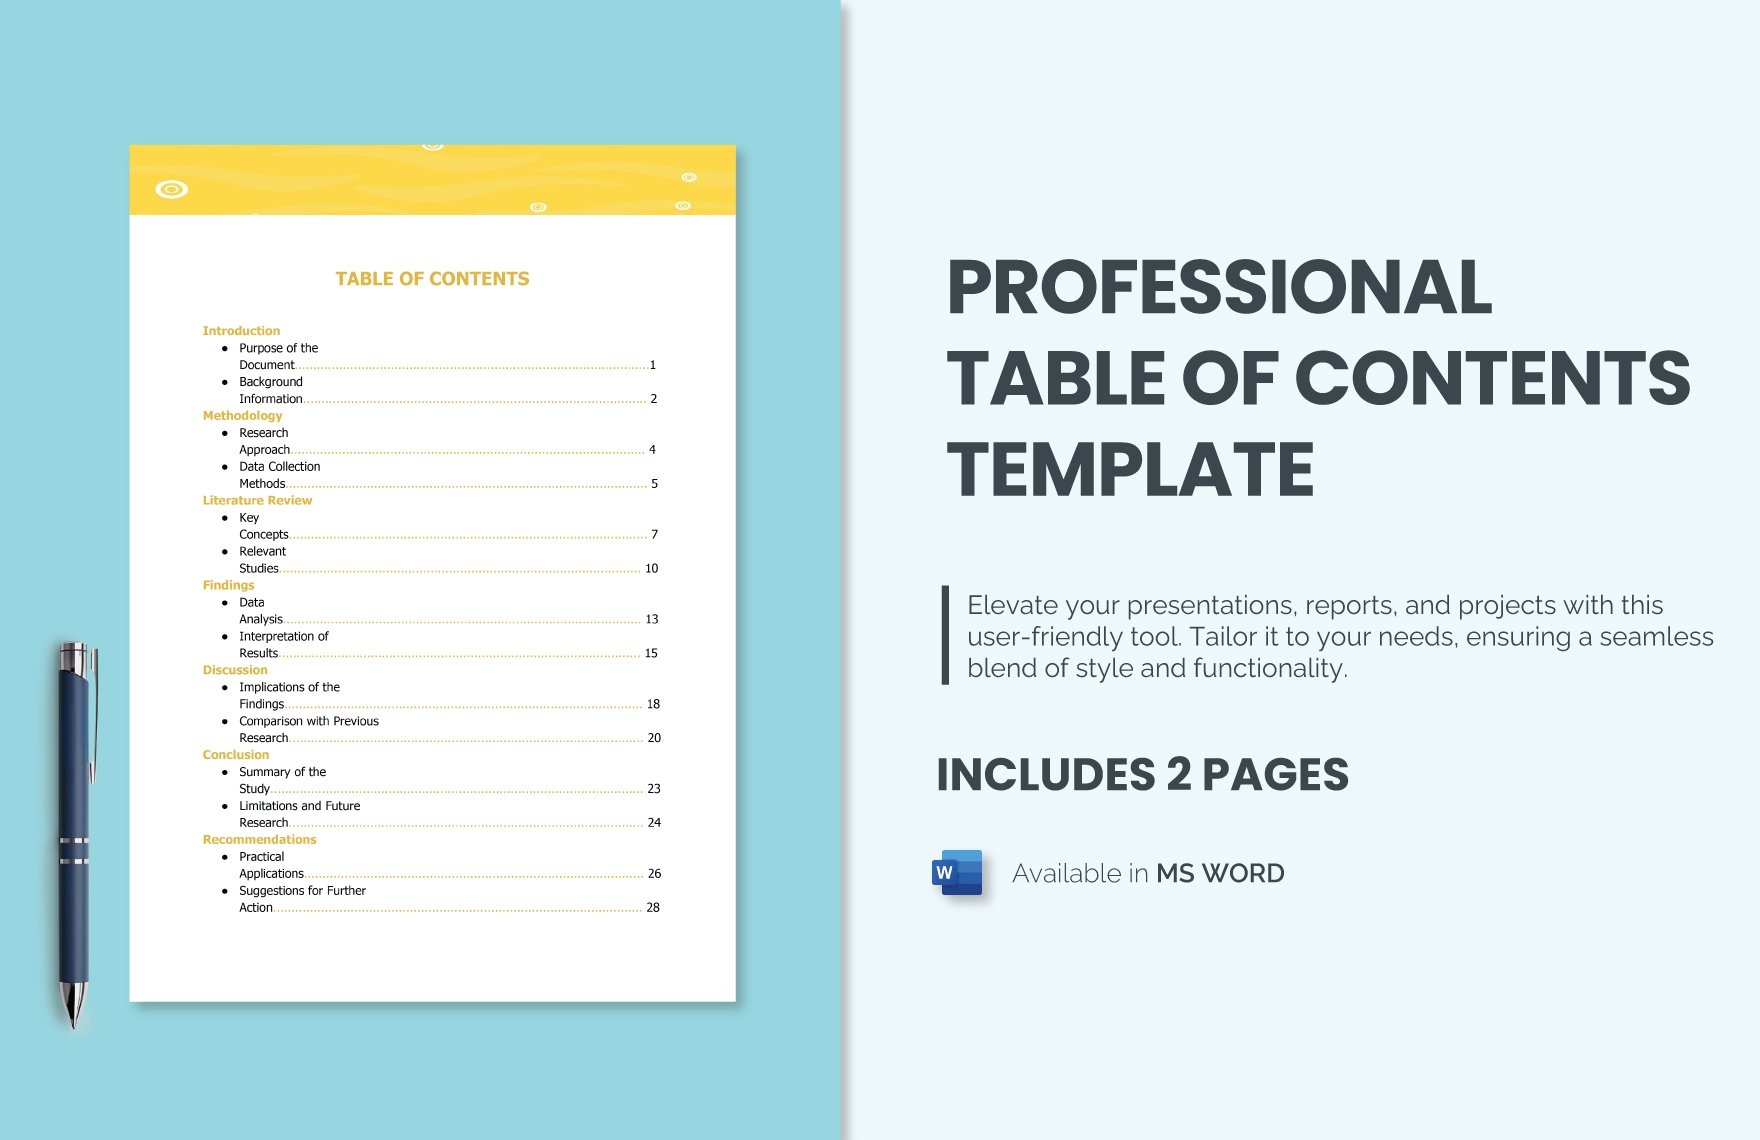 Professional Table of Contents Template